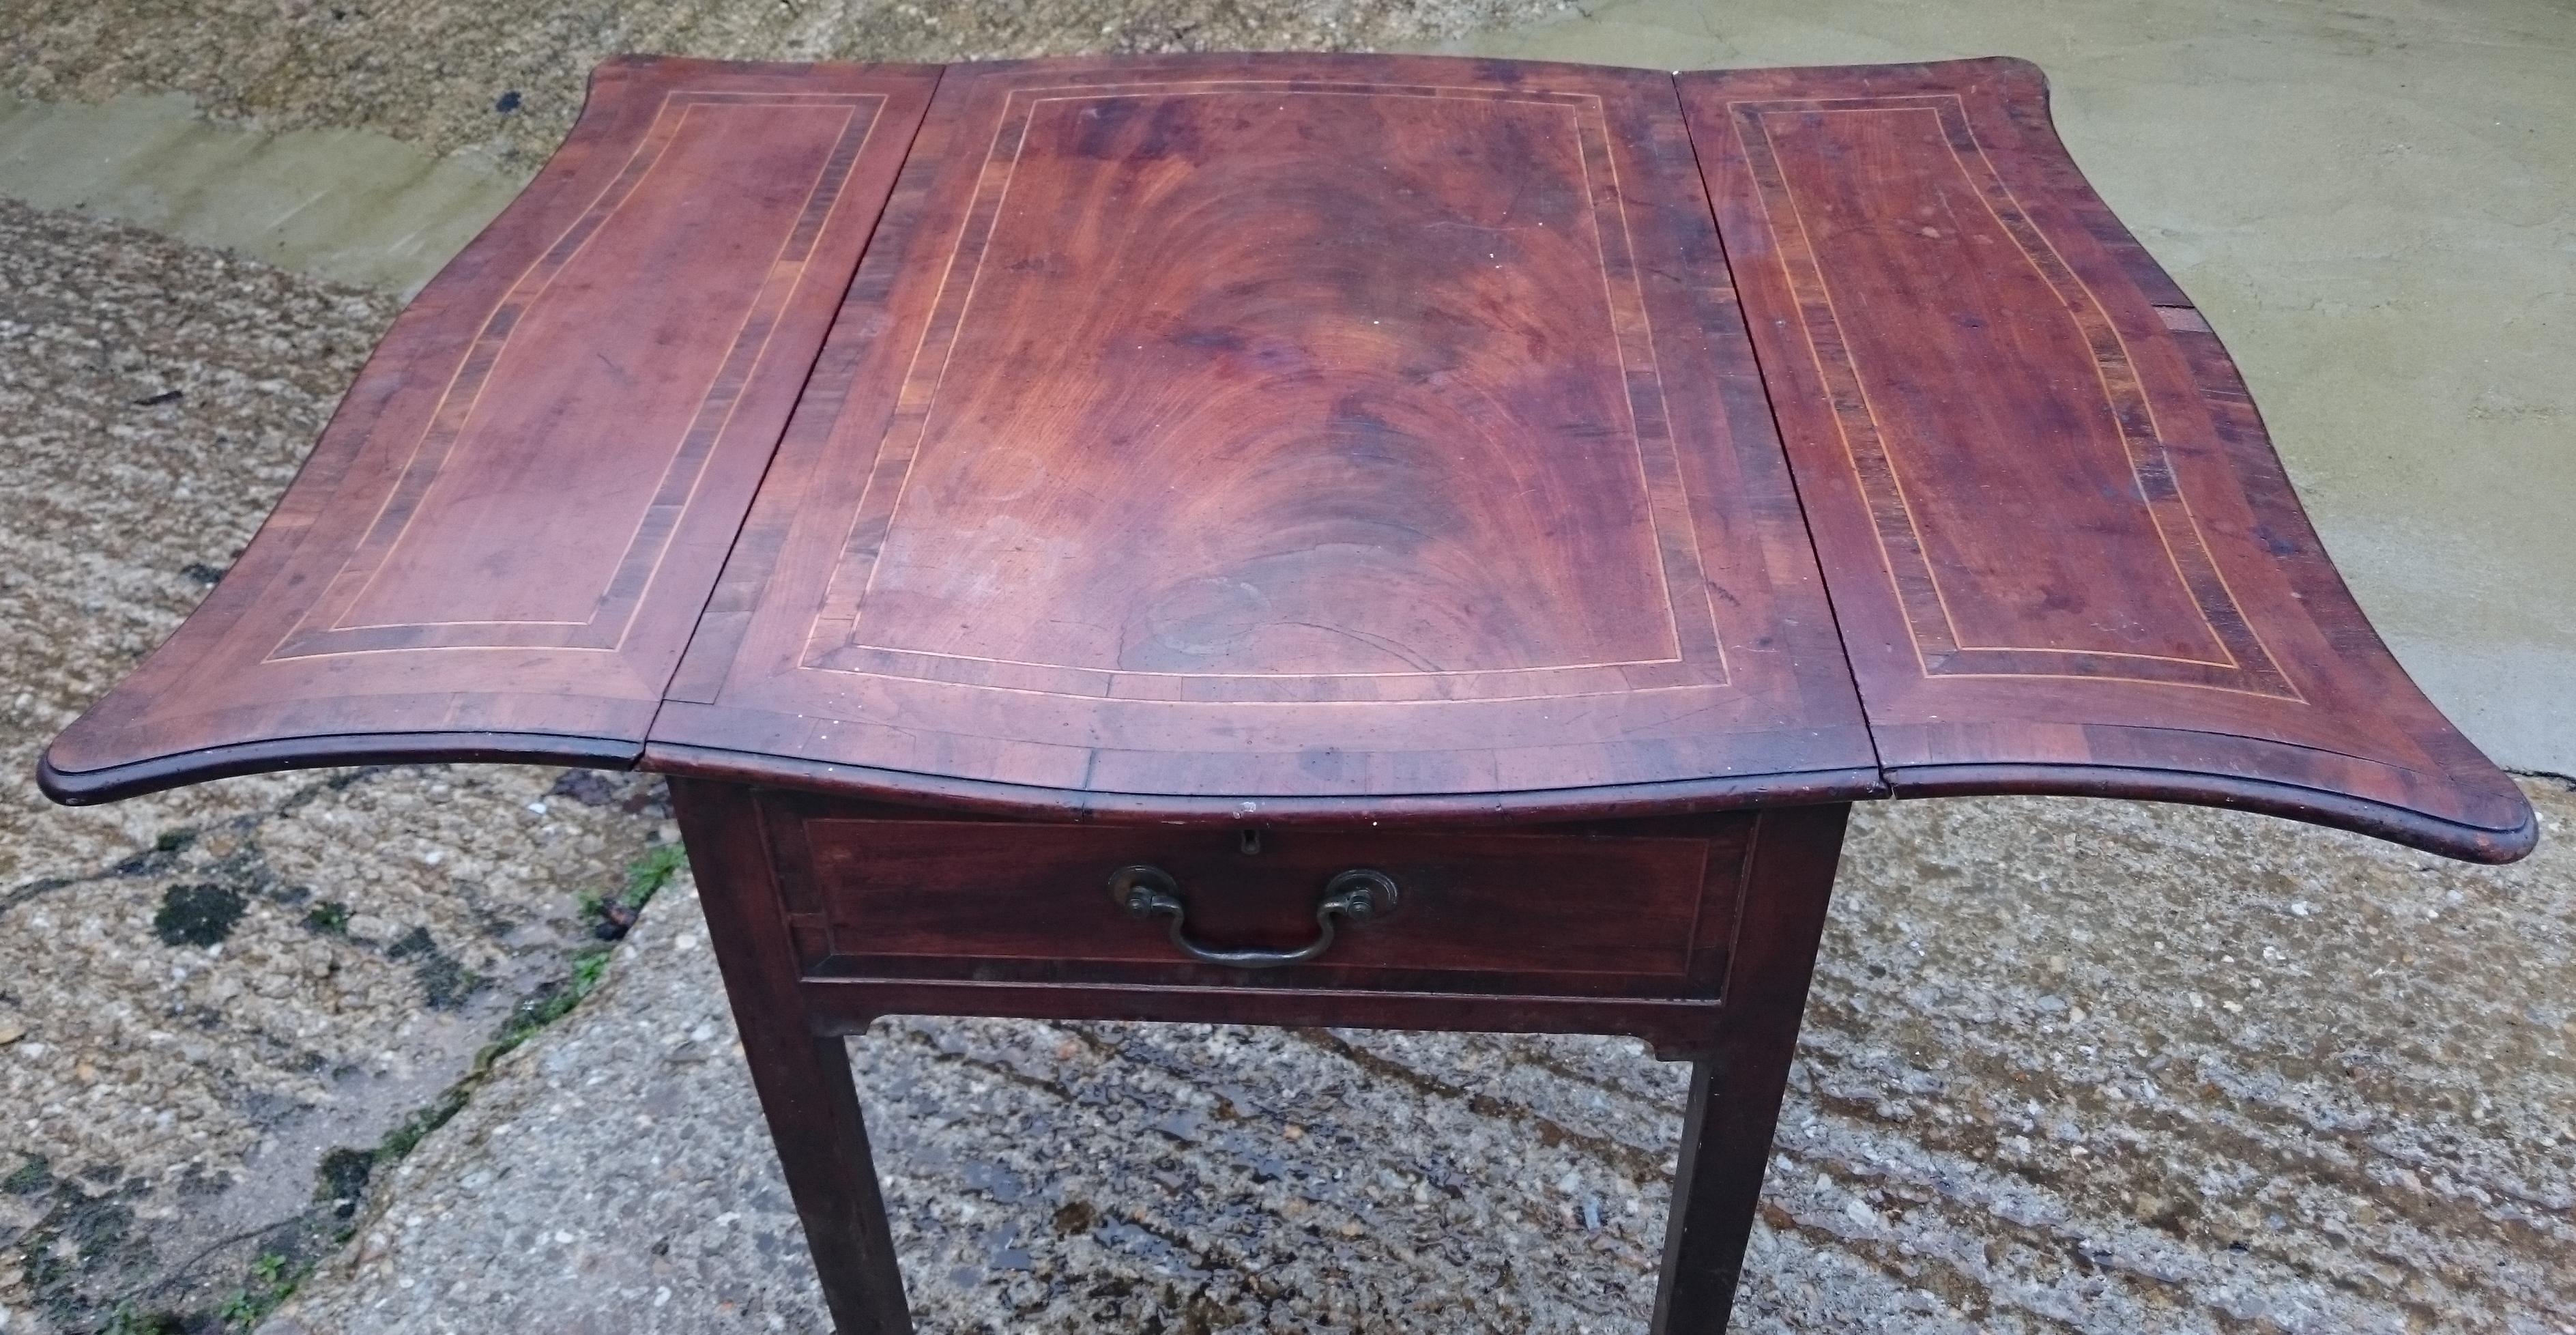 Eighteenth century George III period mahogany antique Pembroke table. This pretty little table is really outstanding, it is made of an especially interesting cut of mahogany, it has a lovely shaped top, it has mahogany lined drawers, it has